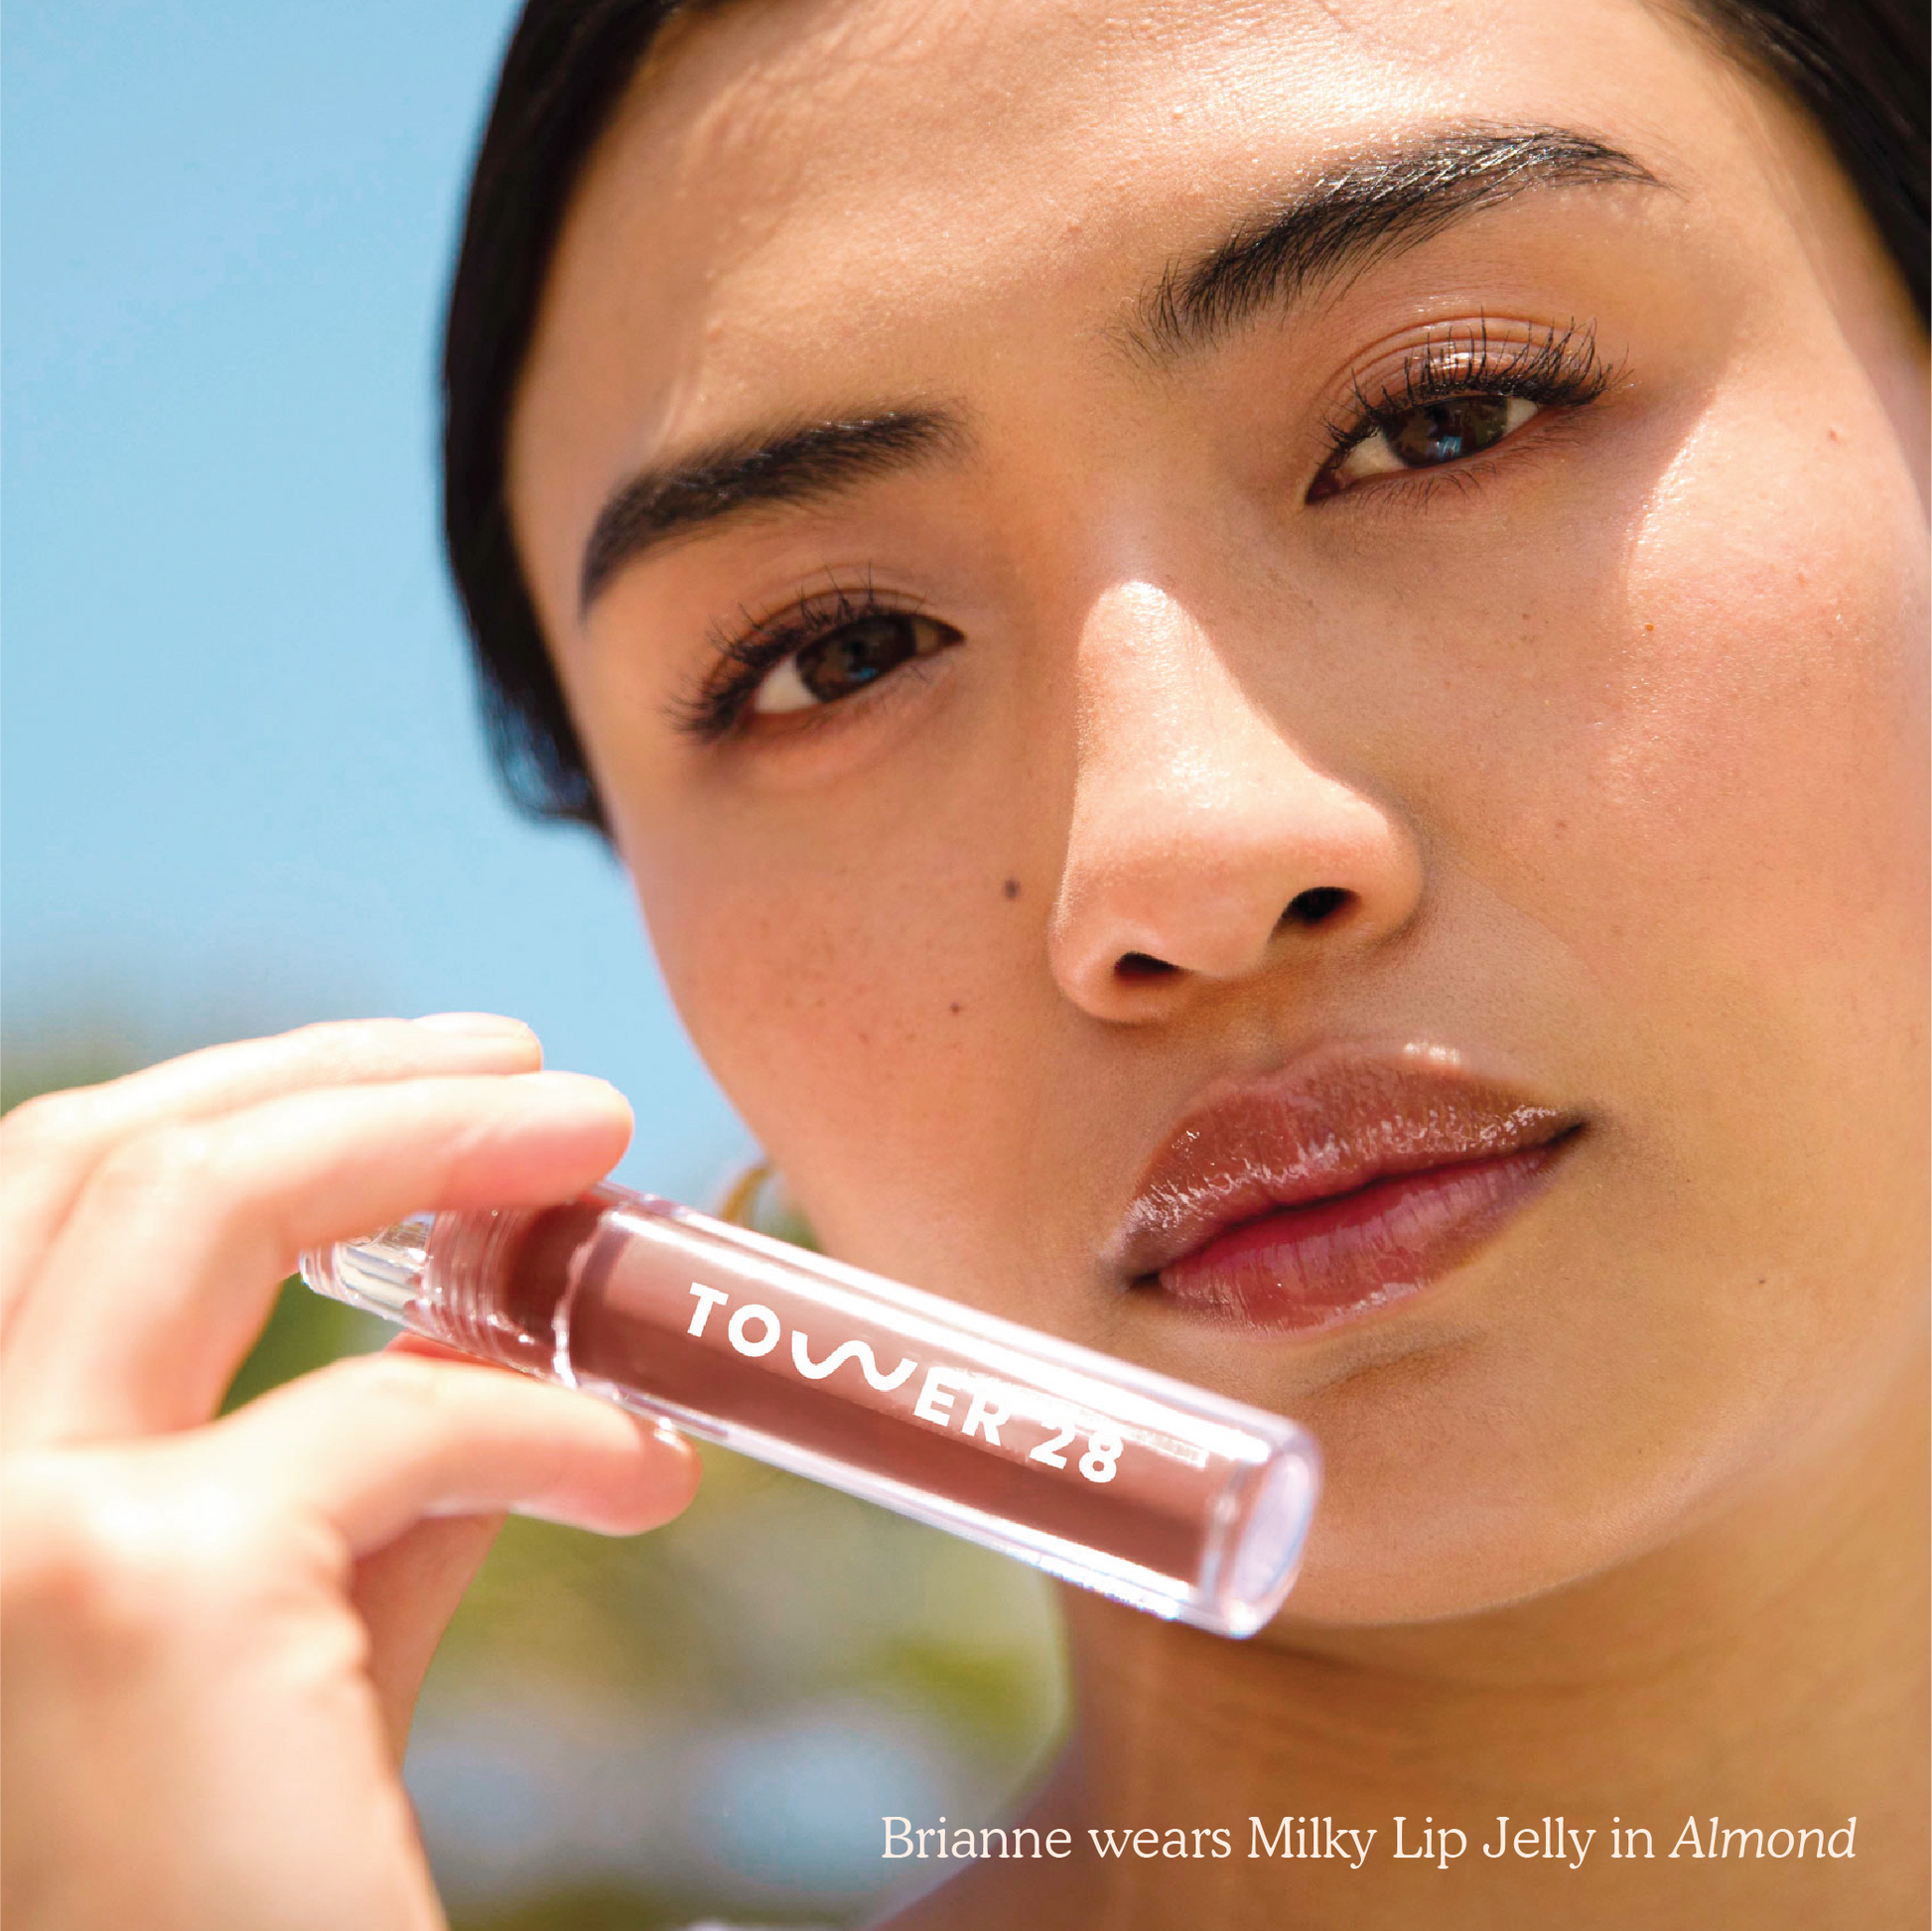 [Shared.- Closeup photo of a girl holding the Tower 28 Beauty ShineOn Milky Lip Jelly in shade Almond (a milky chocolate brown) in an acrylic slim lip gloss tube with "Tower 28" logo over her her chin.